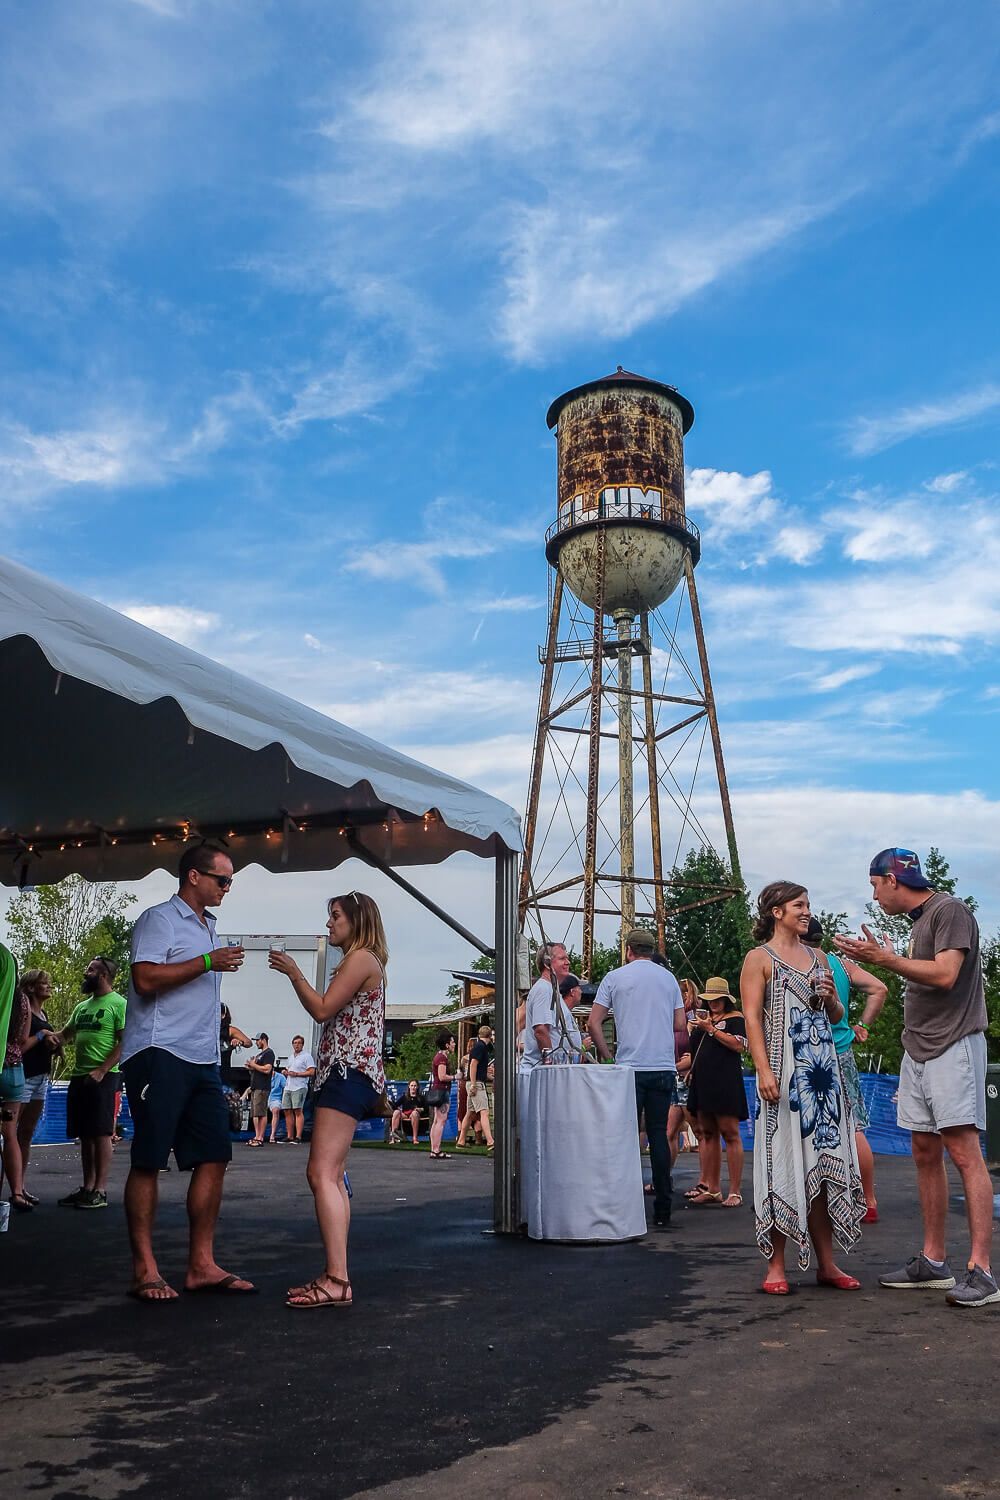 The Funk Collective Festival is a beer festival in Greenville, SC that focuses on sour and funky beers. Find out if you should go!